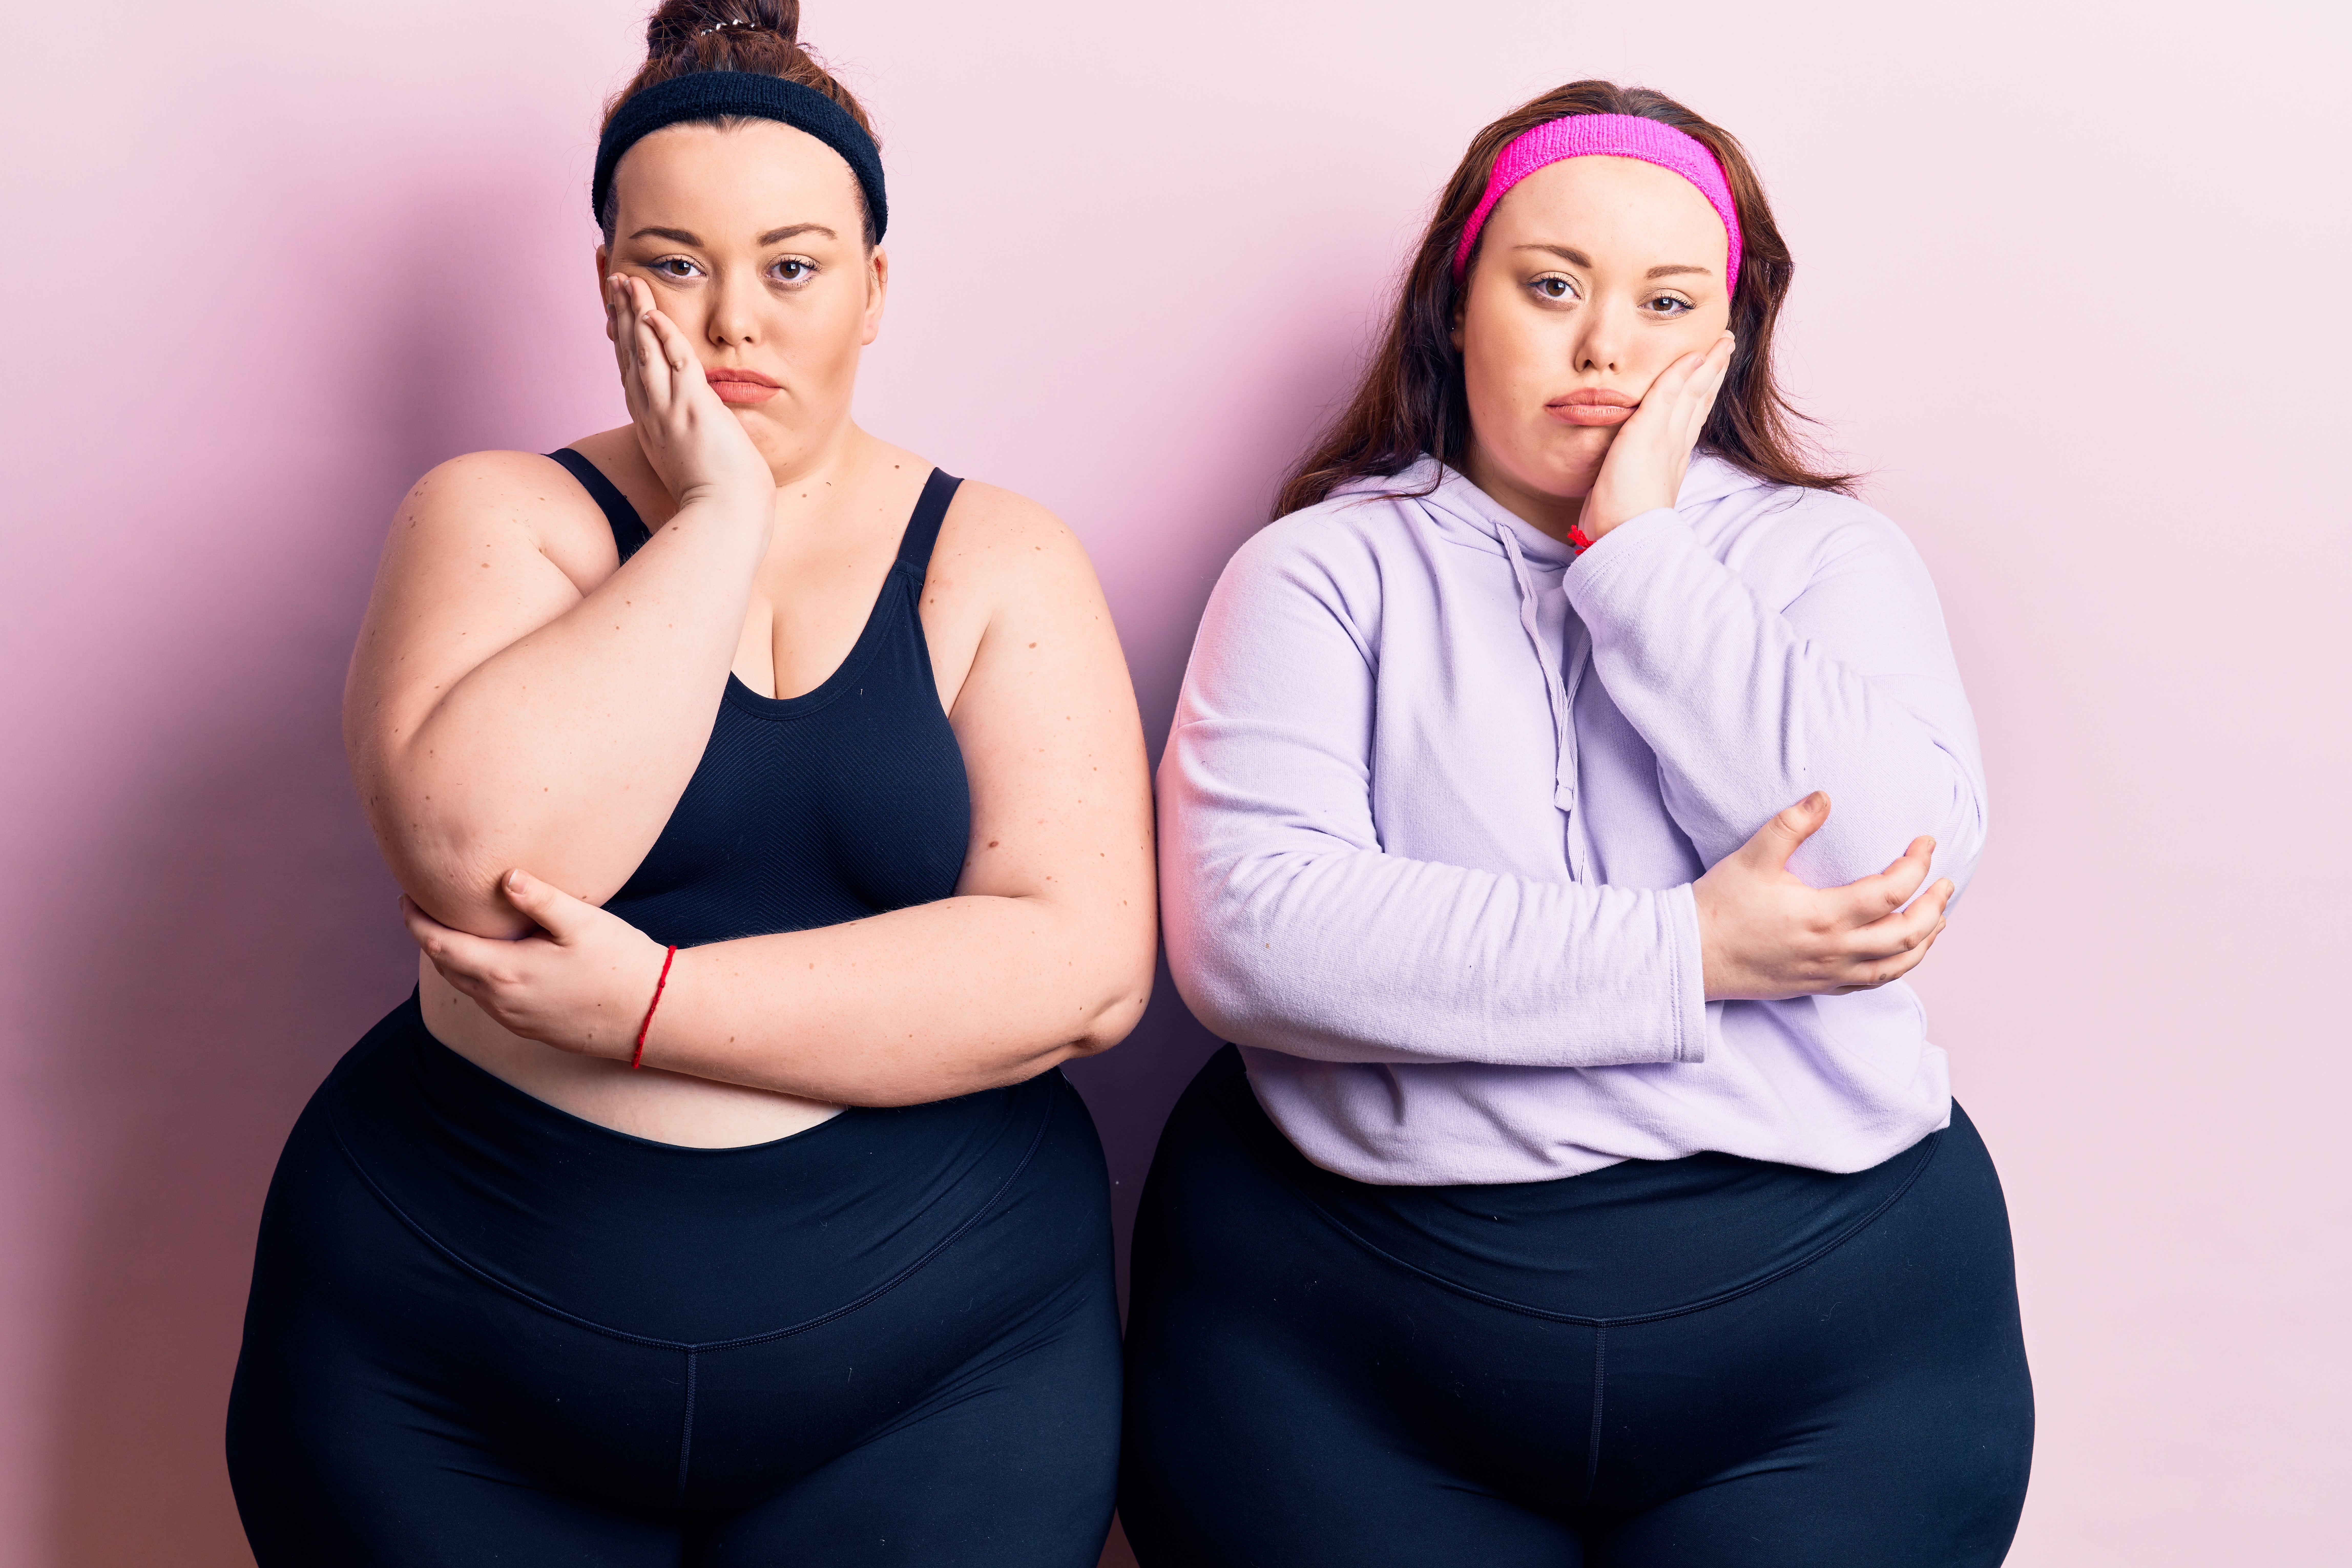 Two plus-size women in athletic clothing with tired expressions.